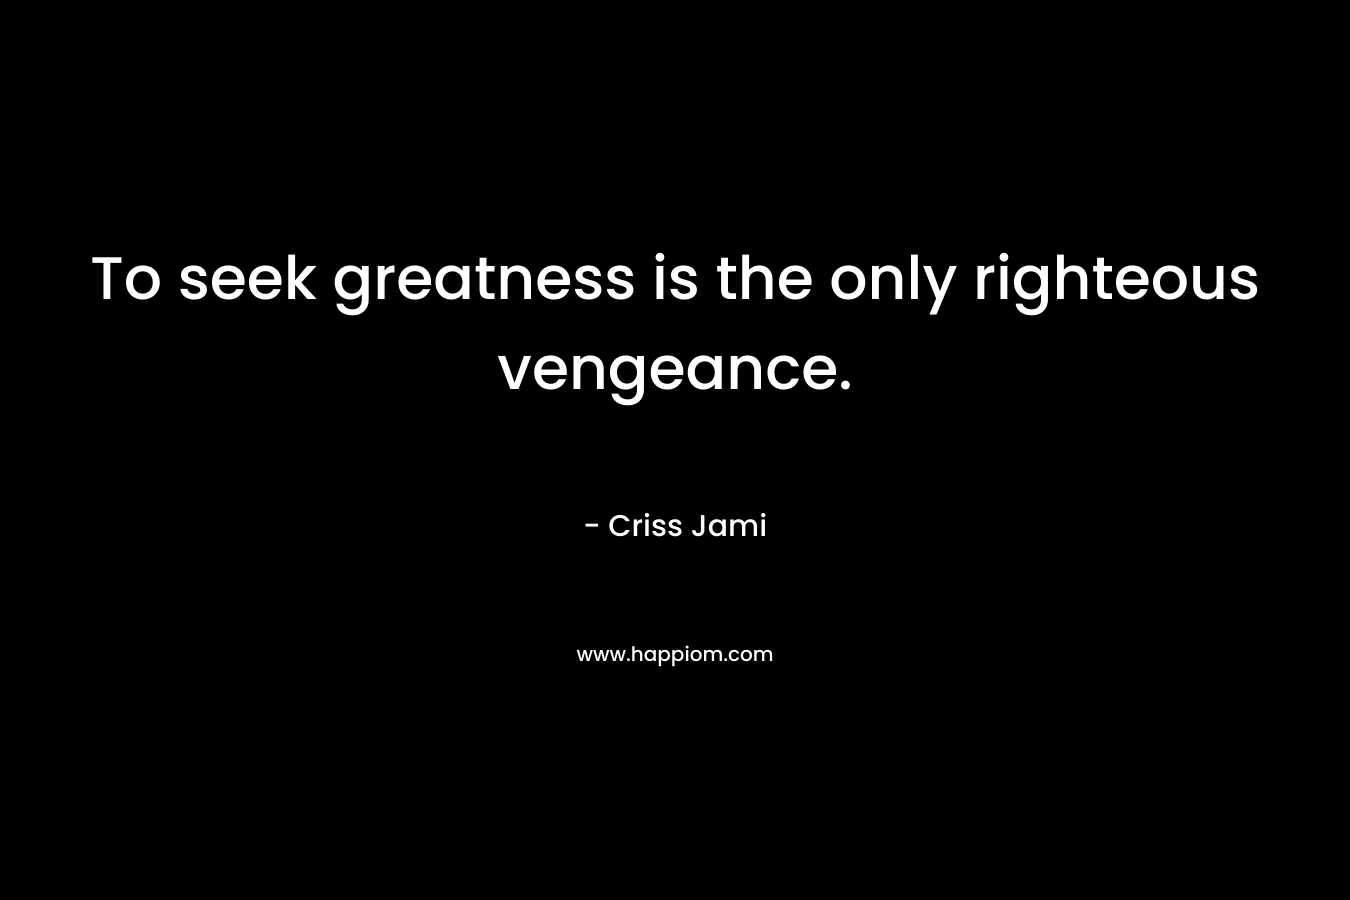 To seek greatness is the only righteous vengeance.